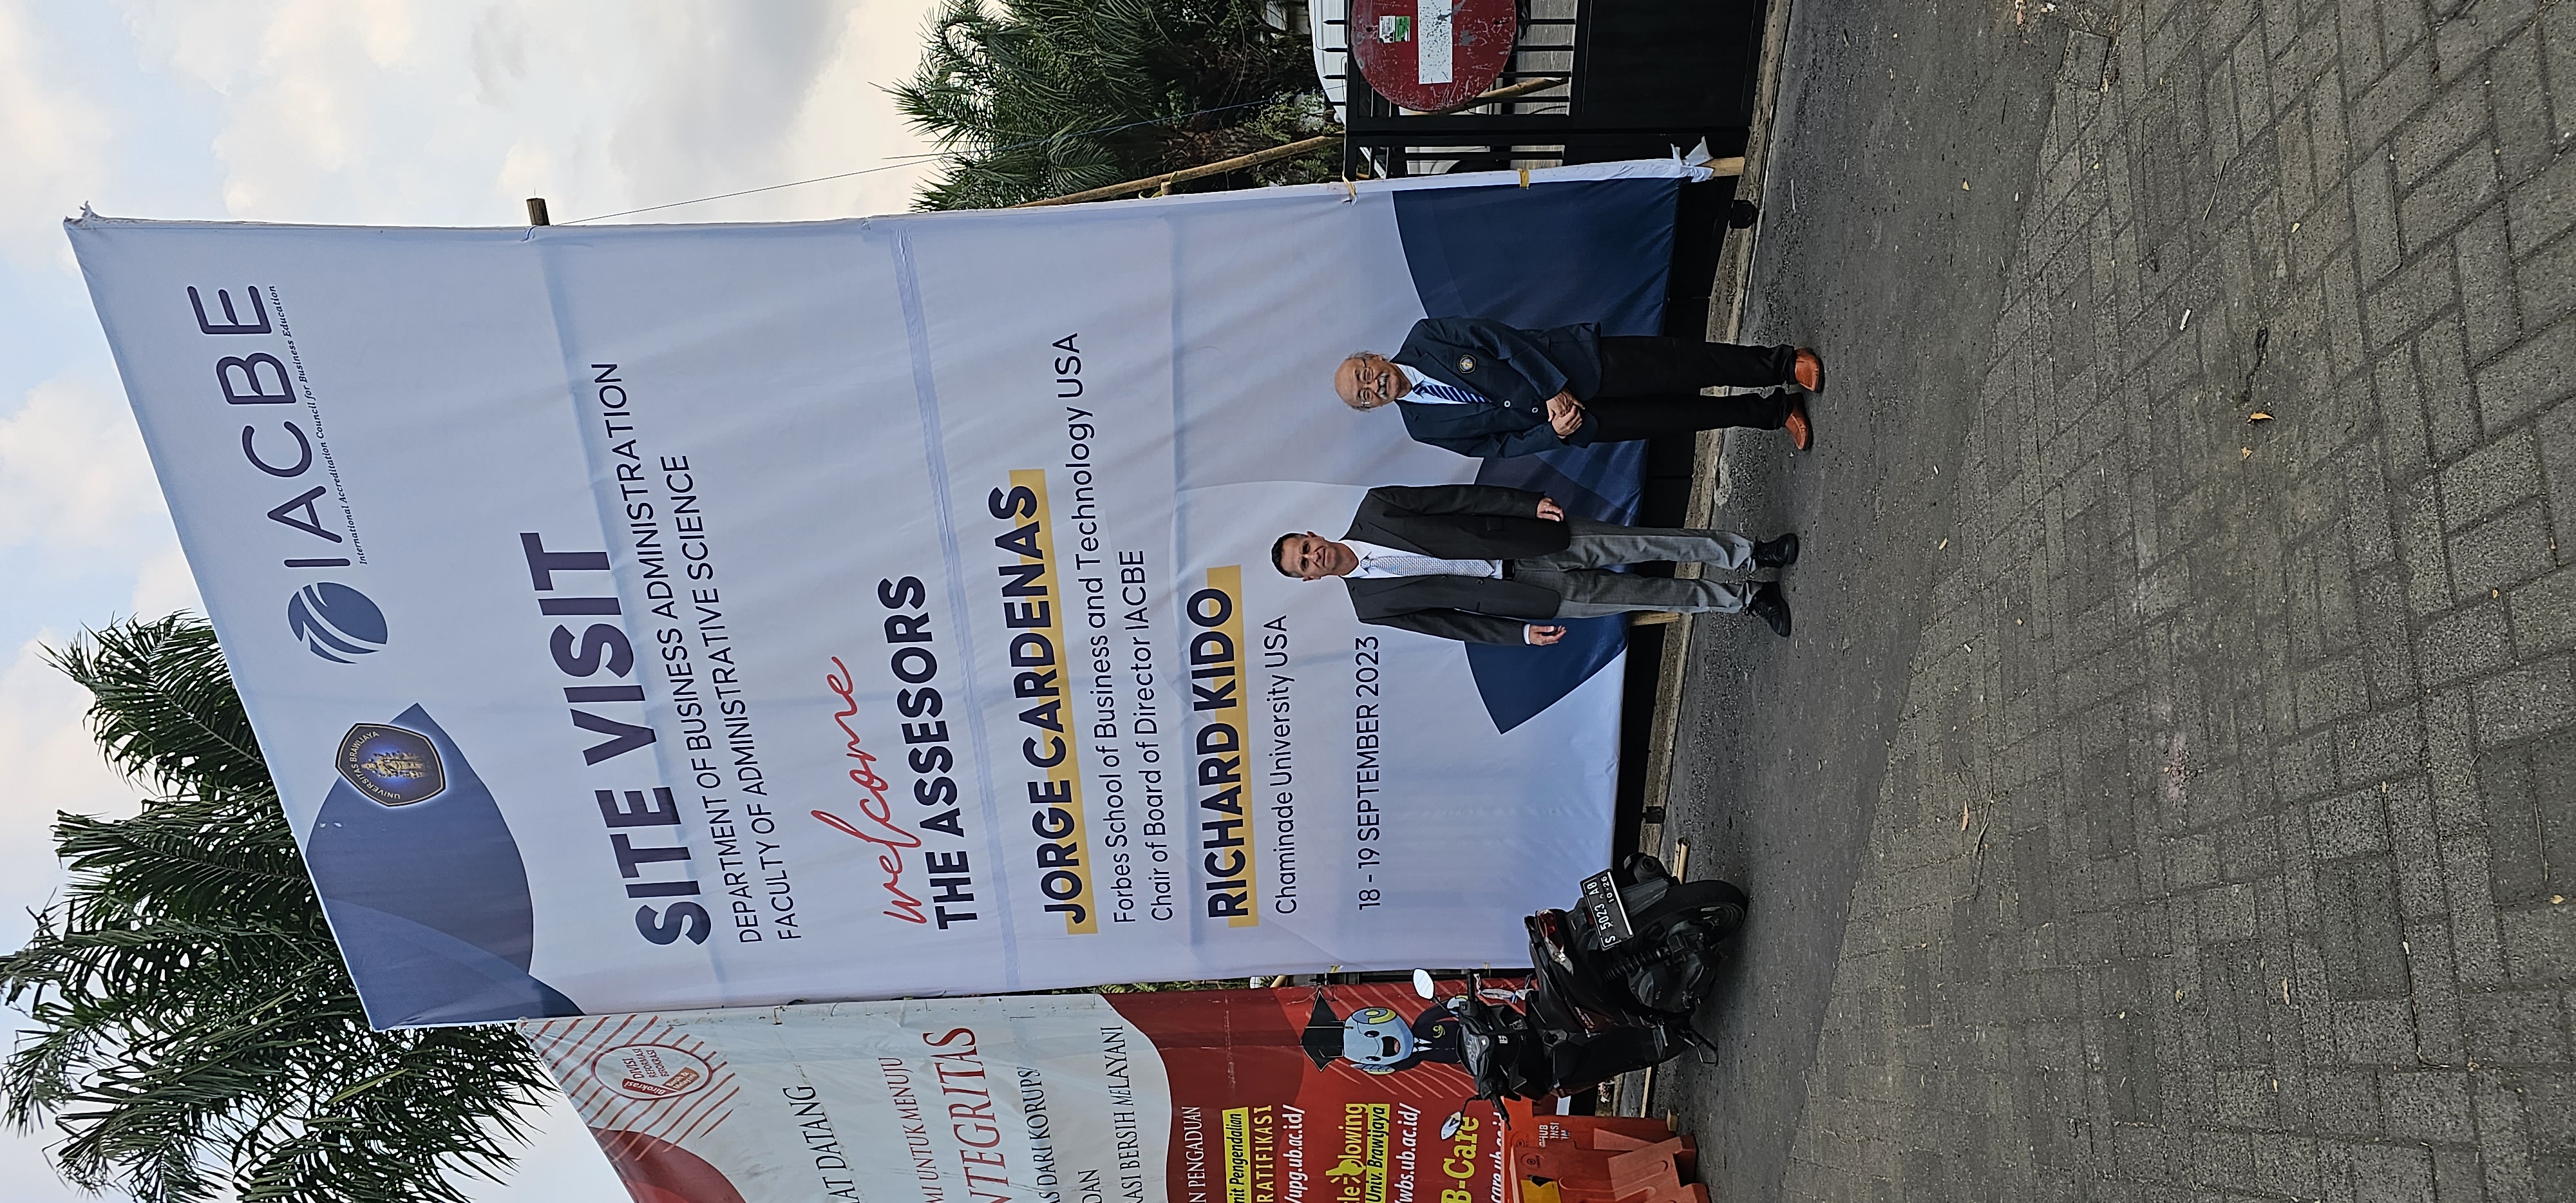 IACBE site visit reviewers Dr. Jorge A. Cardenas and Richard Kido in front of welcome banner at Brawijaya University Campus in Malang Indonesia.